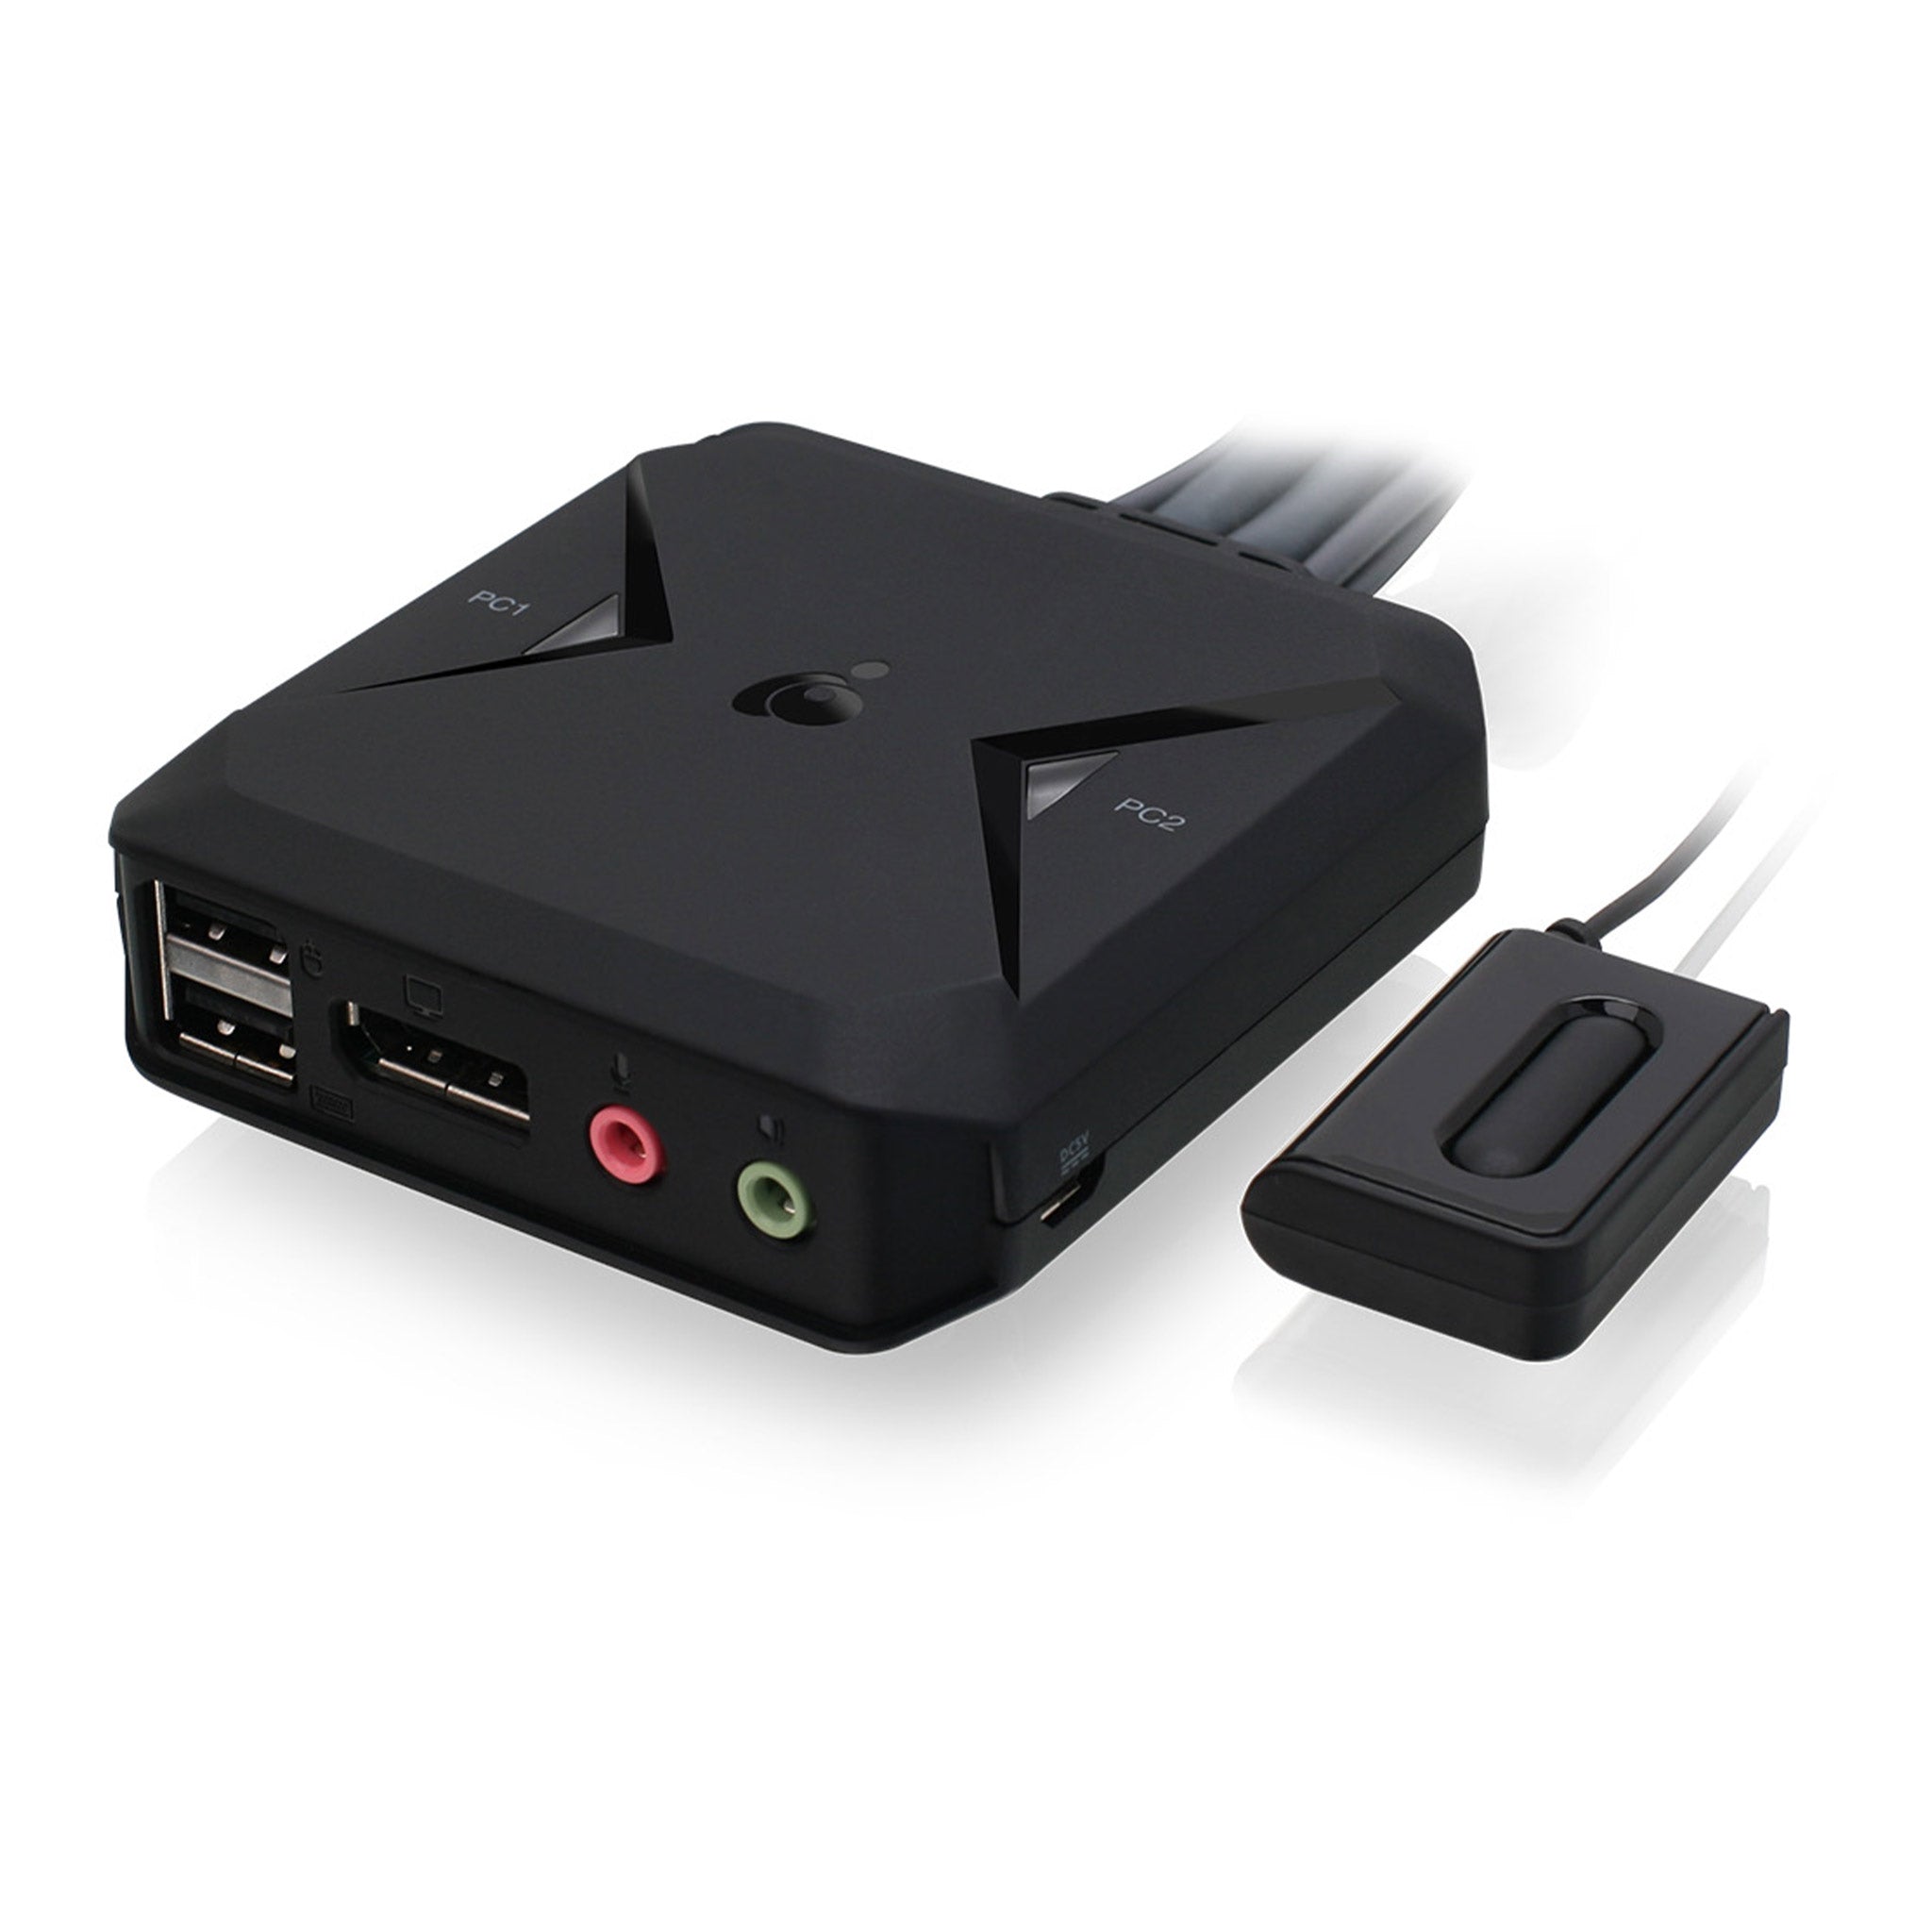 IOGEAR - GCS32HU - 2-Port Full HD KVM Switch with HDMI and USB Connections